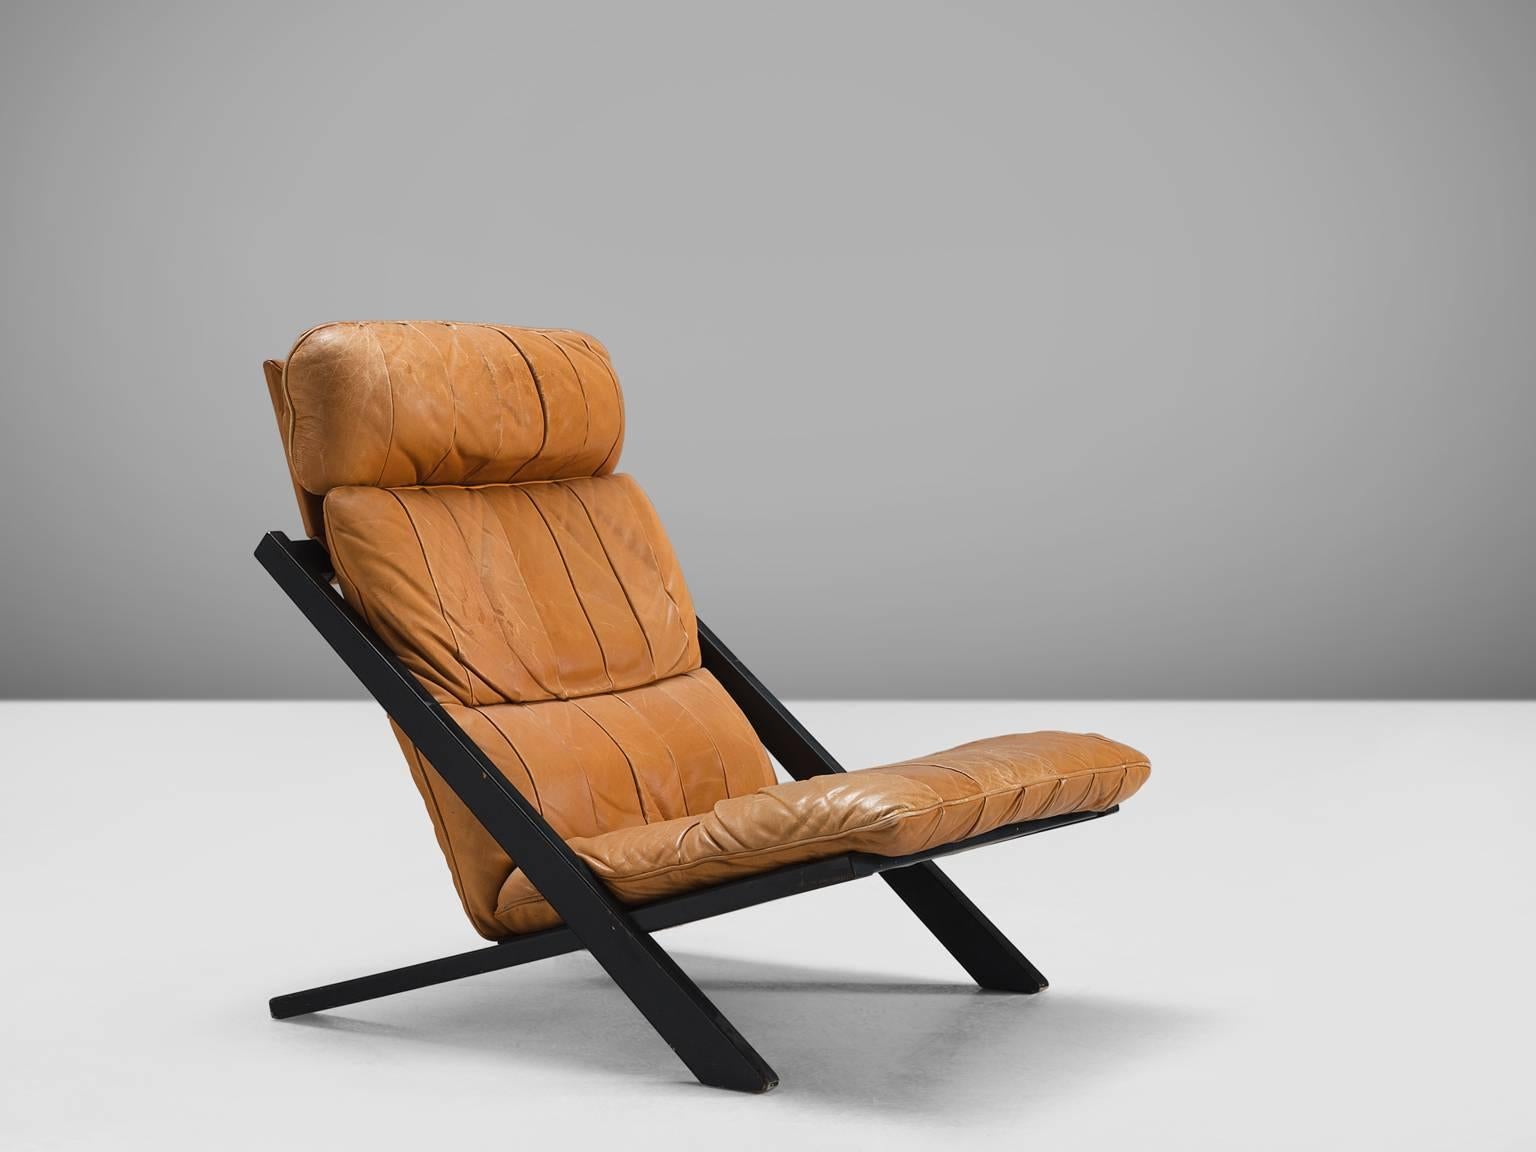 Ueli bergere for De Sede, lounge chair. Switzerland, 1970s.

High back lounge chair by de Swiss quality manufacturer De Sede. The X-shaped frame consists of black lacquered wood. This makes an interesting contrast to the warm patinated cognac brown